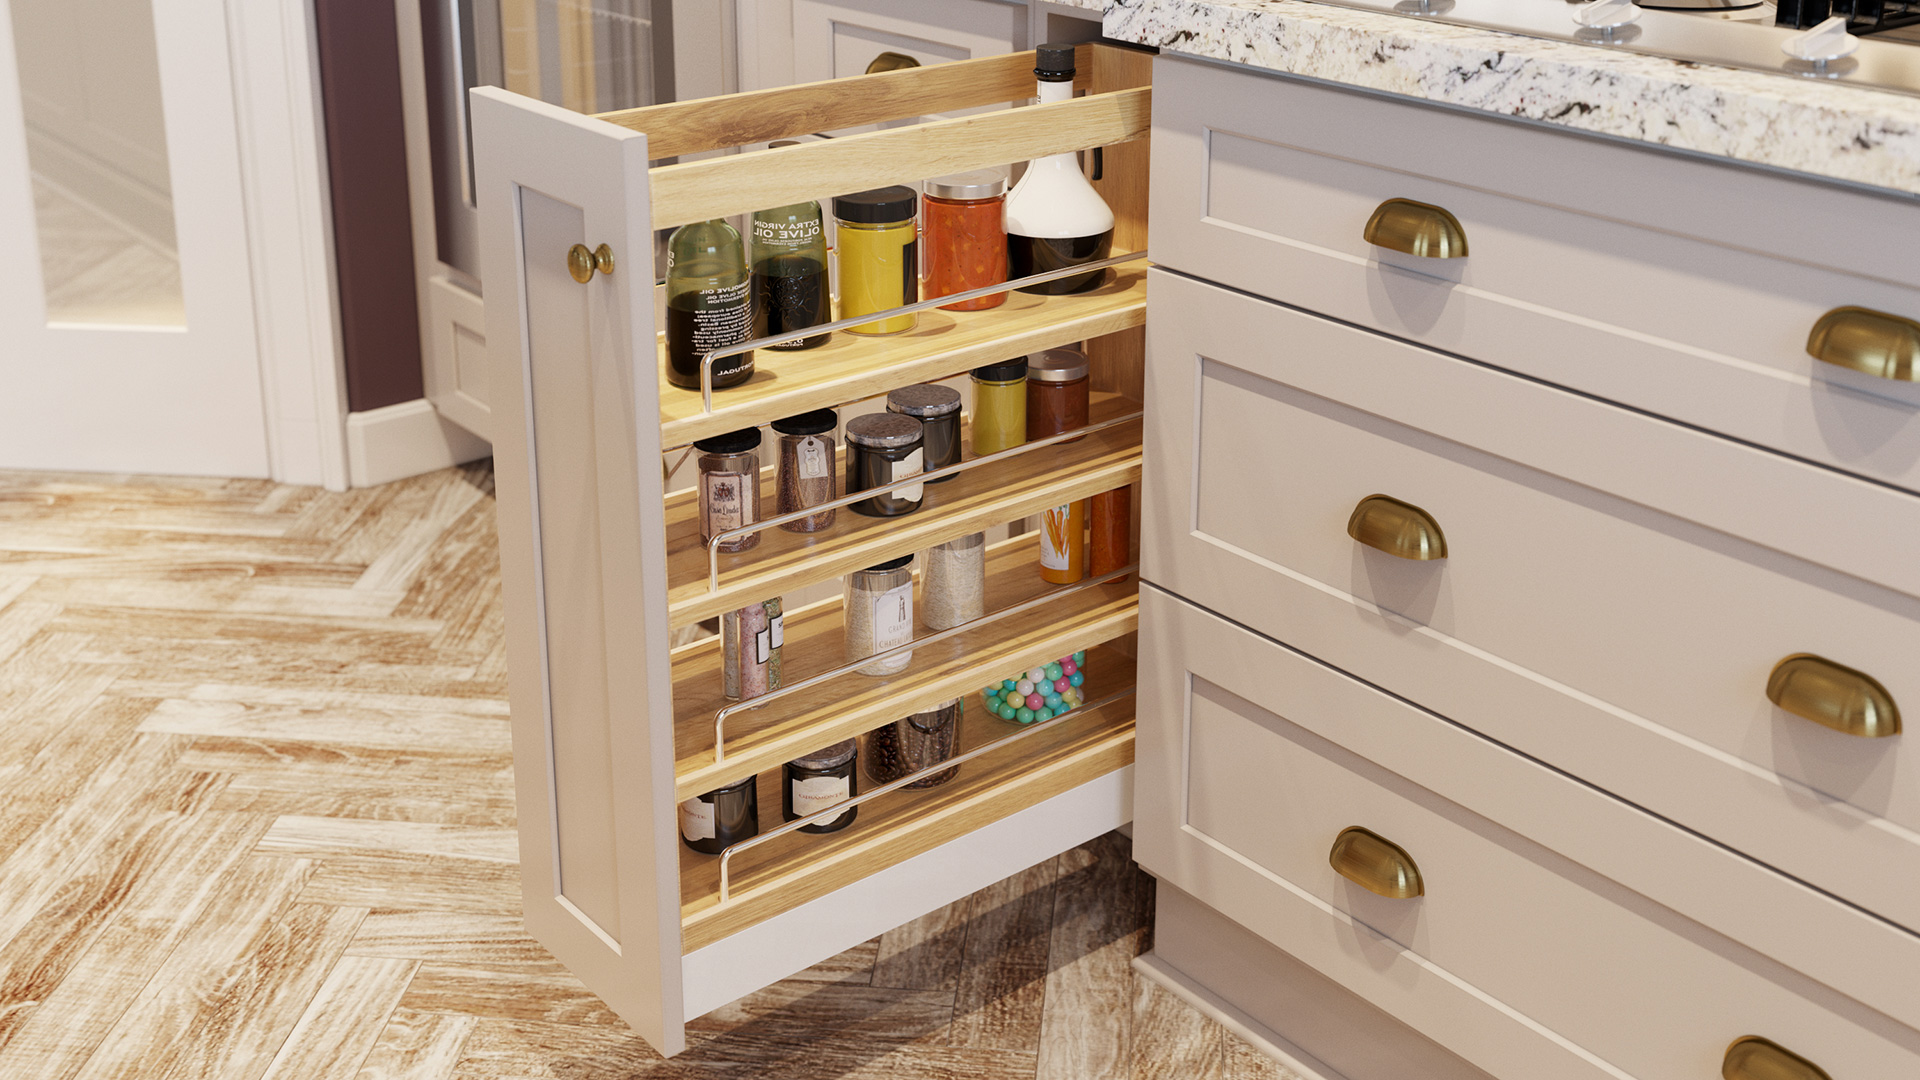 Kitchen Cabinets 101 - Cabinet Shapes, & Styles | CabinetCorp